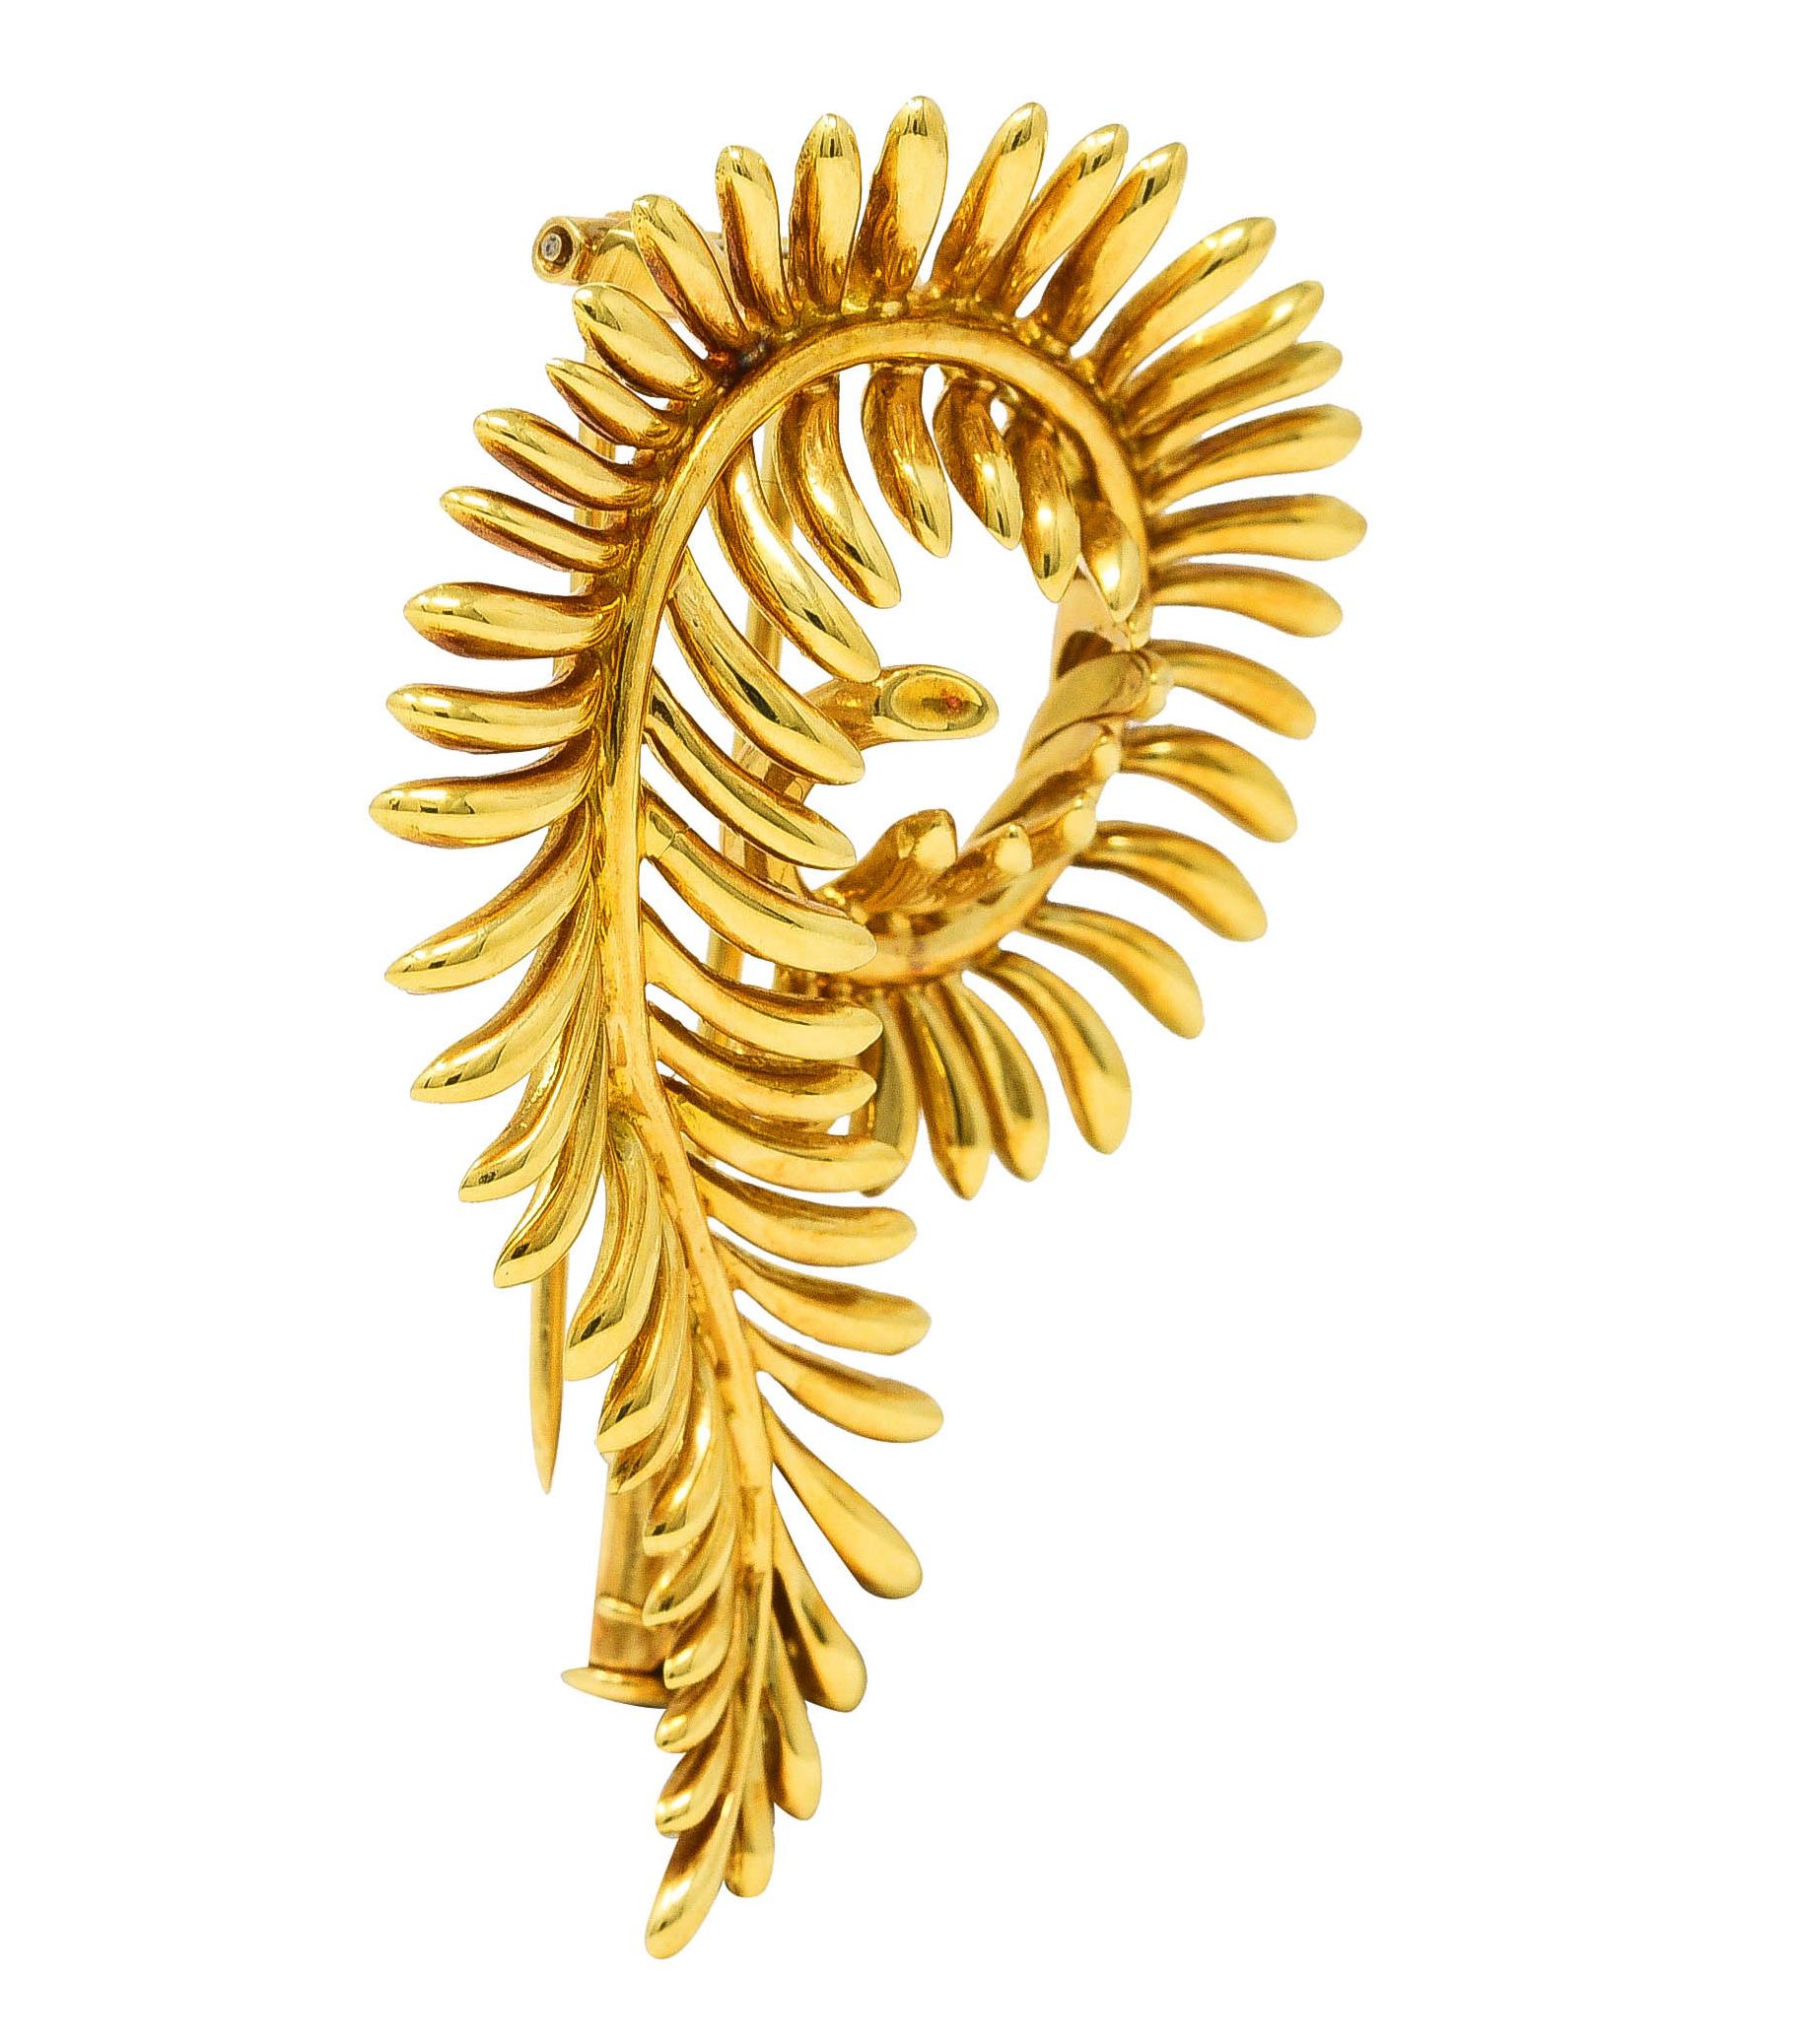 Brooch is designed as a stylized furling feather. With elegant, rounded tendrils and high polished finish. Stamped 750 for 18 karat gold. Fully signed Tiffany & Co. Schlumberger. Circa: 1960's. Measures: 1 1/4 x 1 3/4 inches. Total weight: 13.5